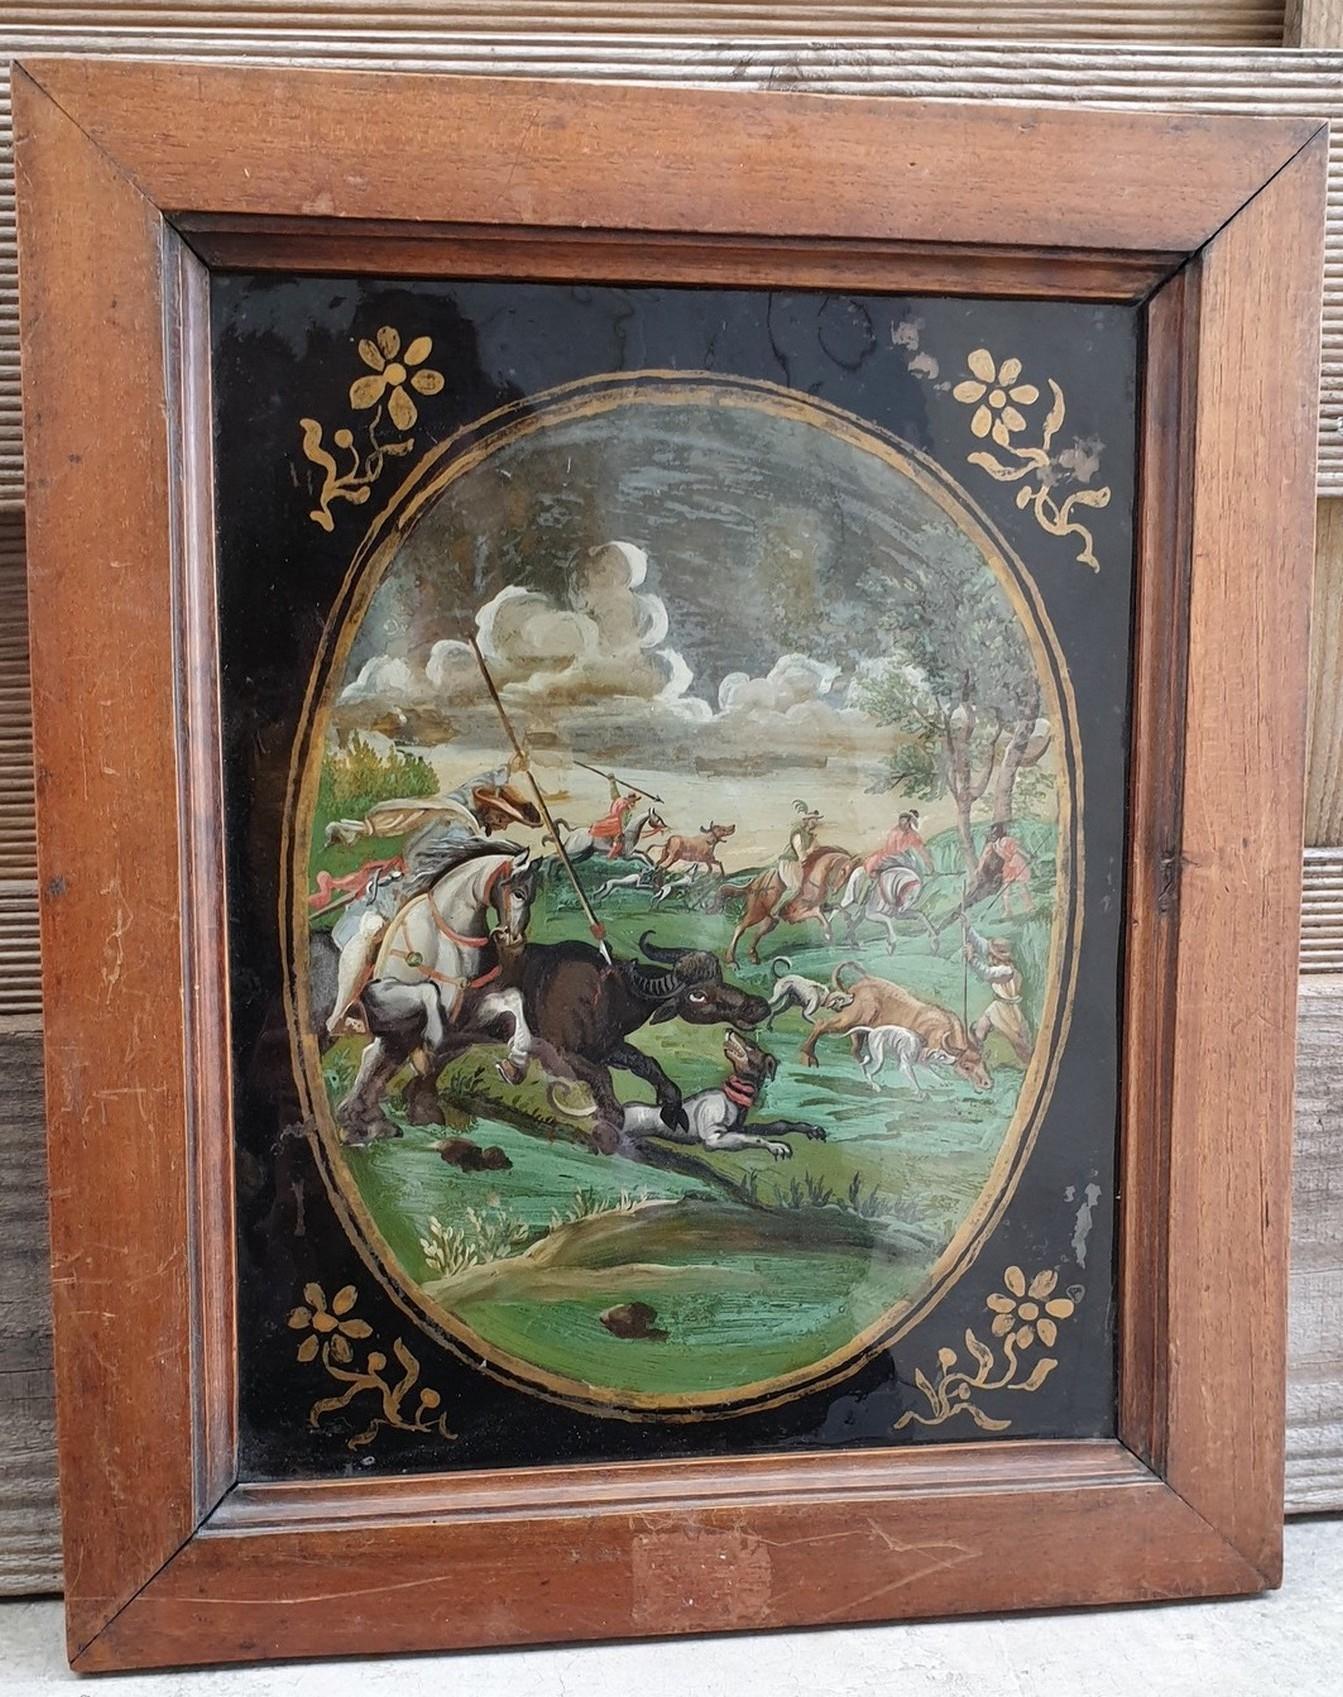 very colorful Fixé-sous-verre (paint under glass), representing a scene of horsemen hunting buffalo, in an oval, on a black background

Indo-Portuguese or Philippine work, 18th century, in a 19th century frame

Very interesting: Painting on reverse